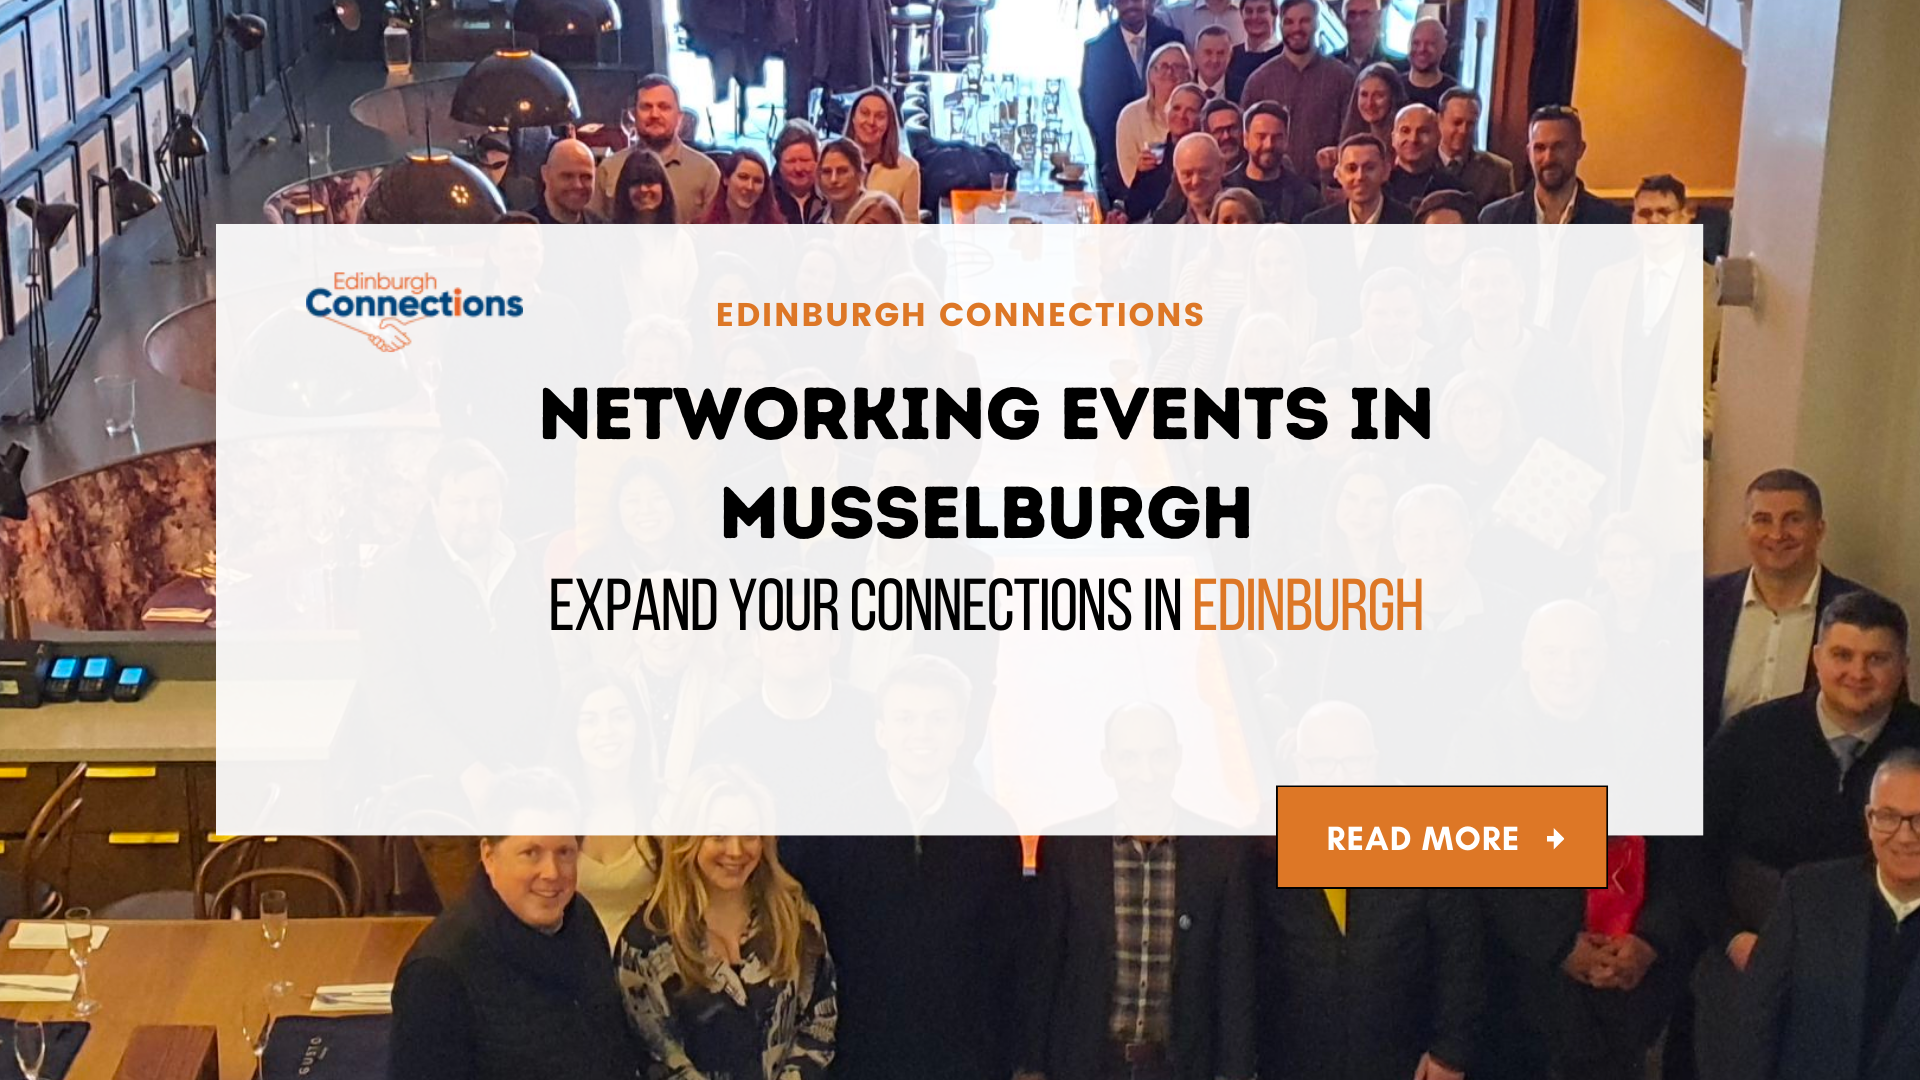 Edinburgh Connections networking for business